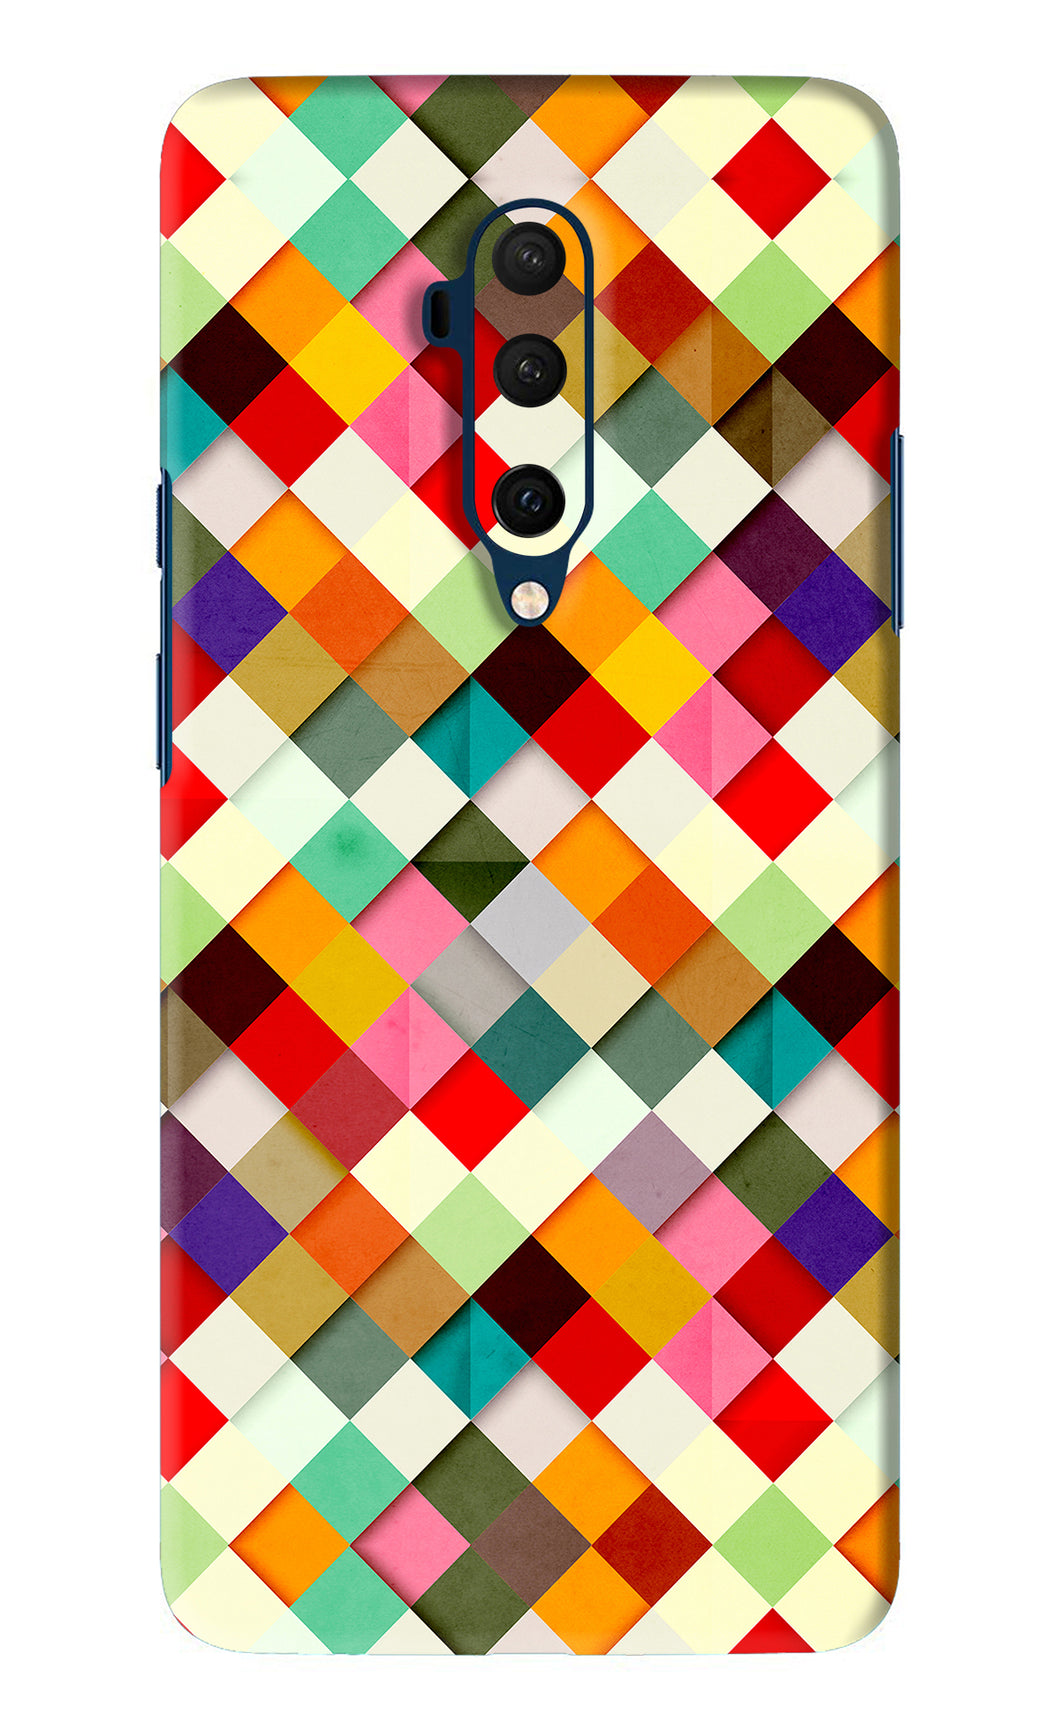 Geometric Abstract Colorful OnePlus 7T Pro Back Skin Wrap